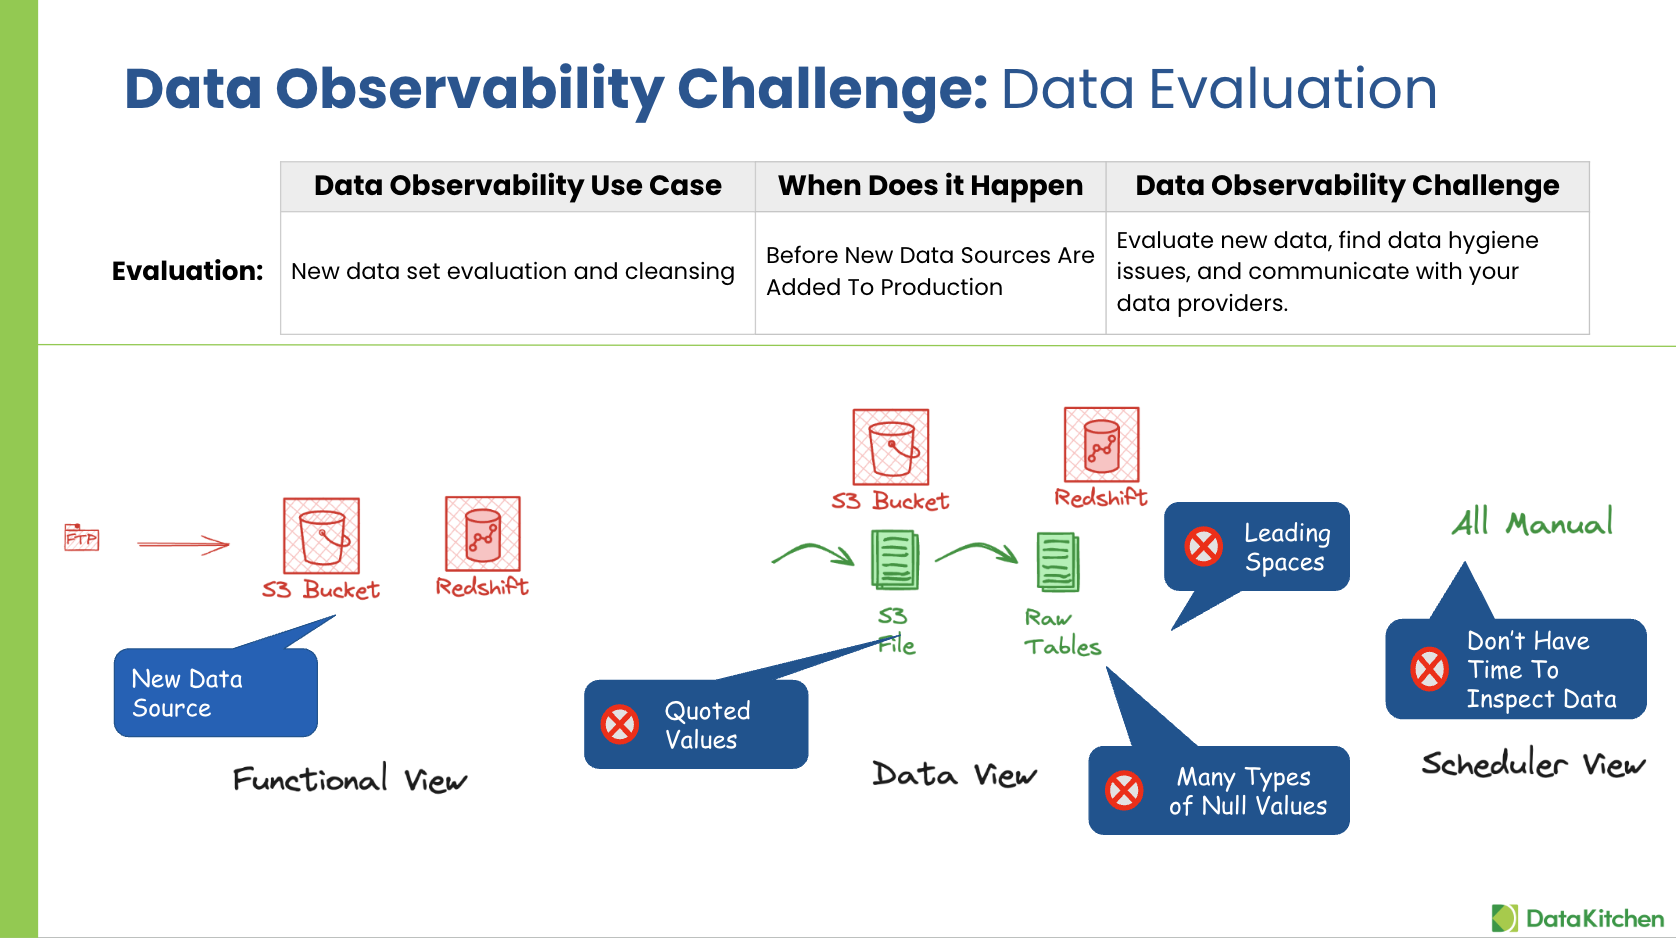 The Five Use Cases in Data Observability: Data Quality in New Data Sources